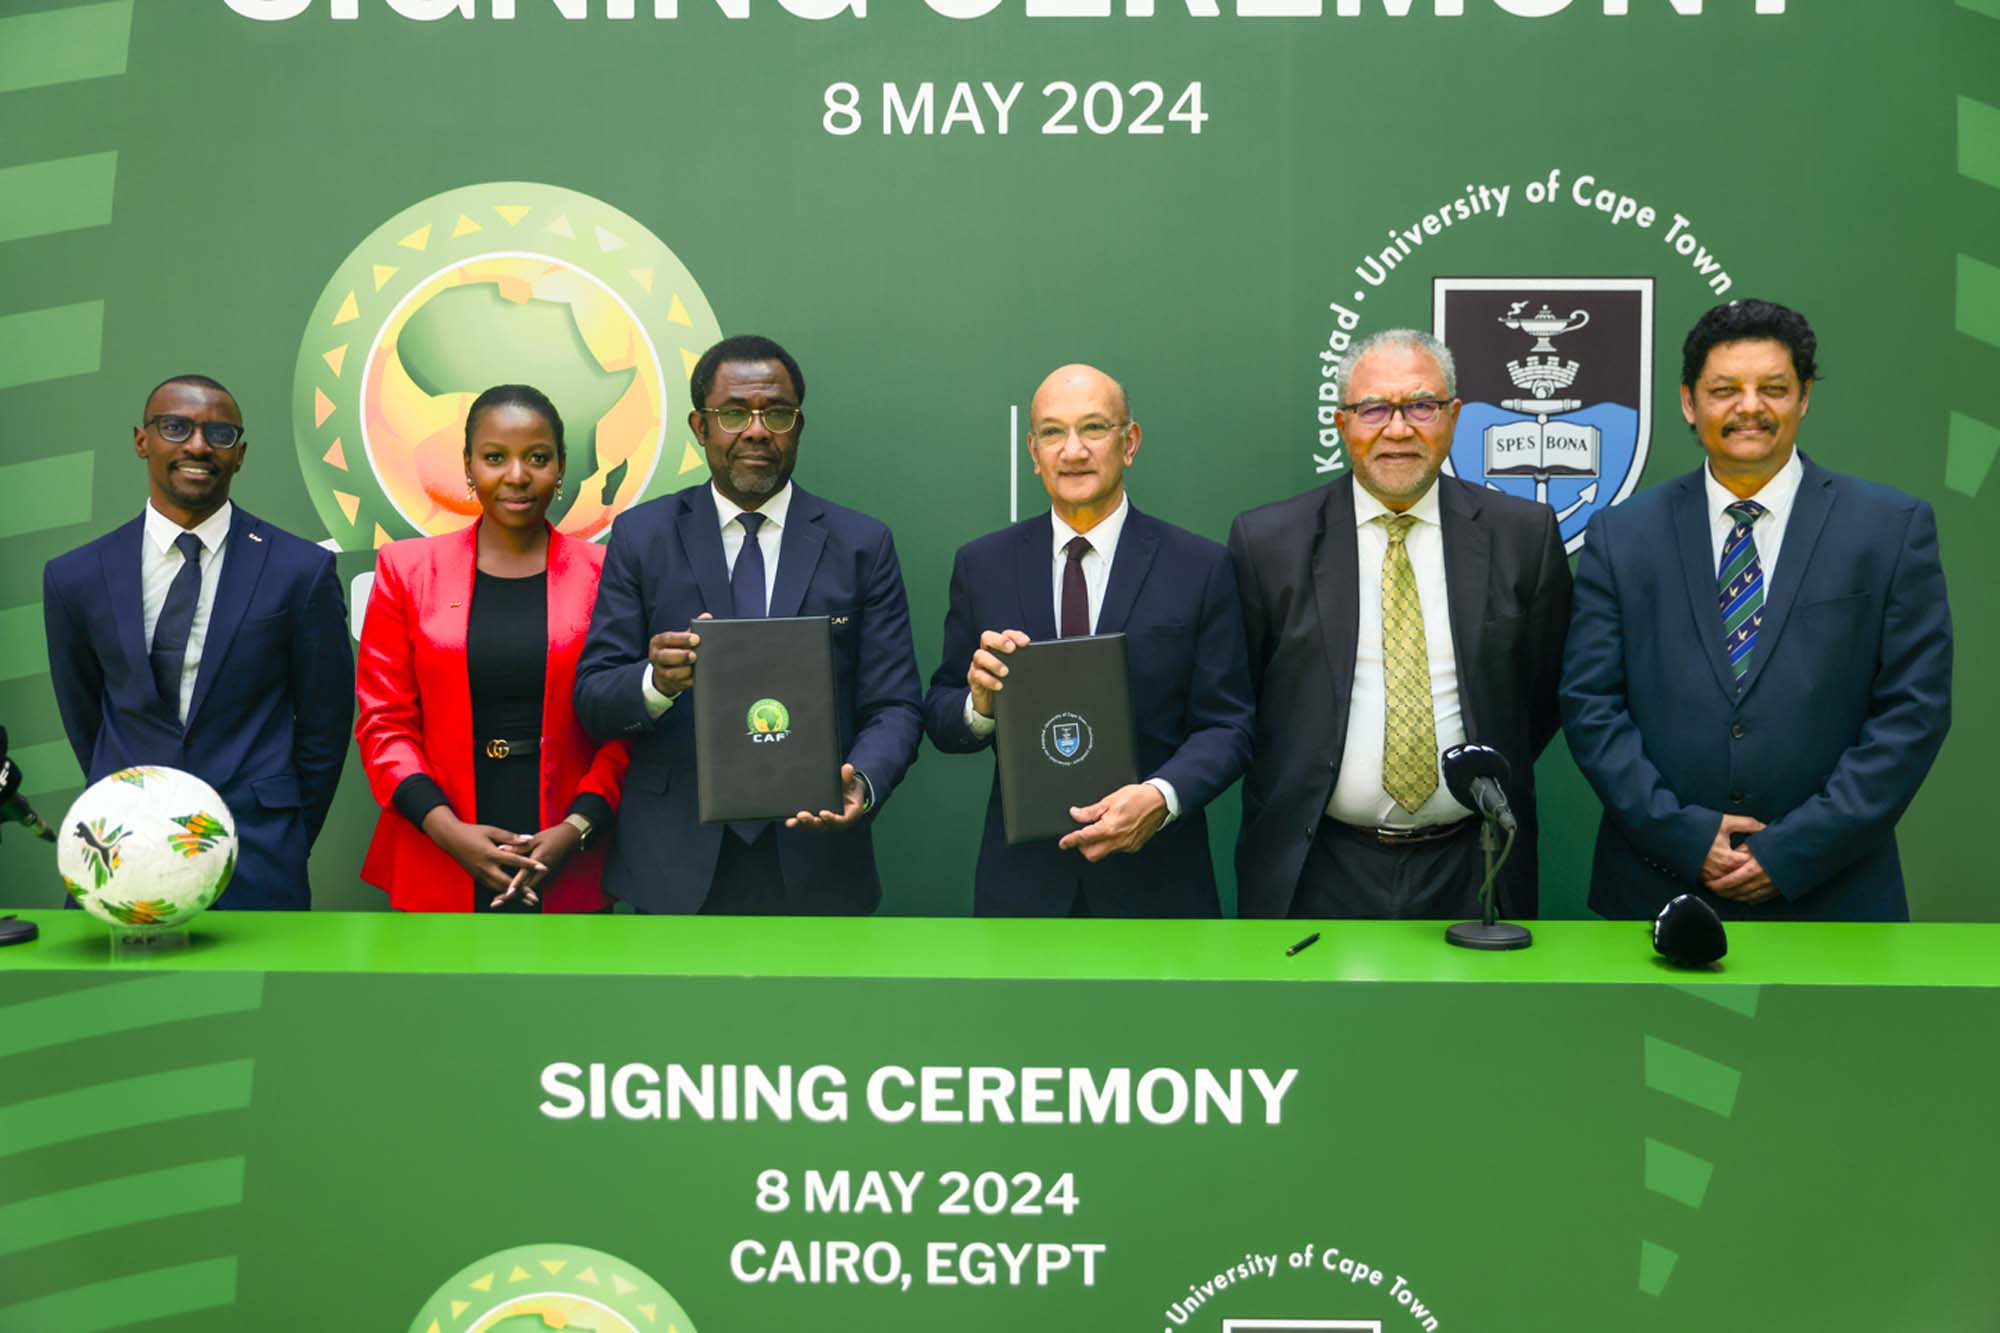 Confédération Africaine de Football (CAF) and University of Cape Town (UCT) executive members